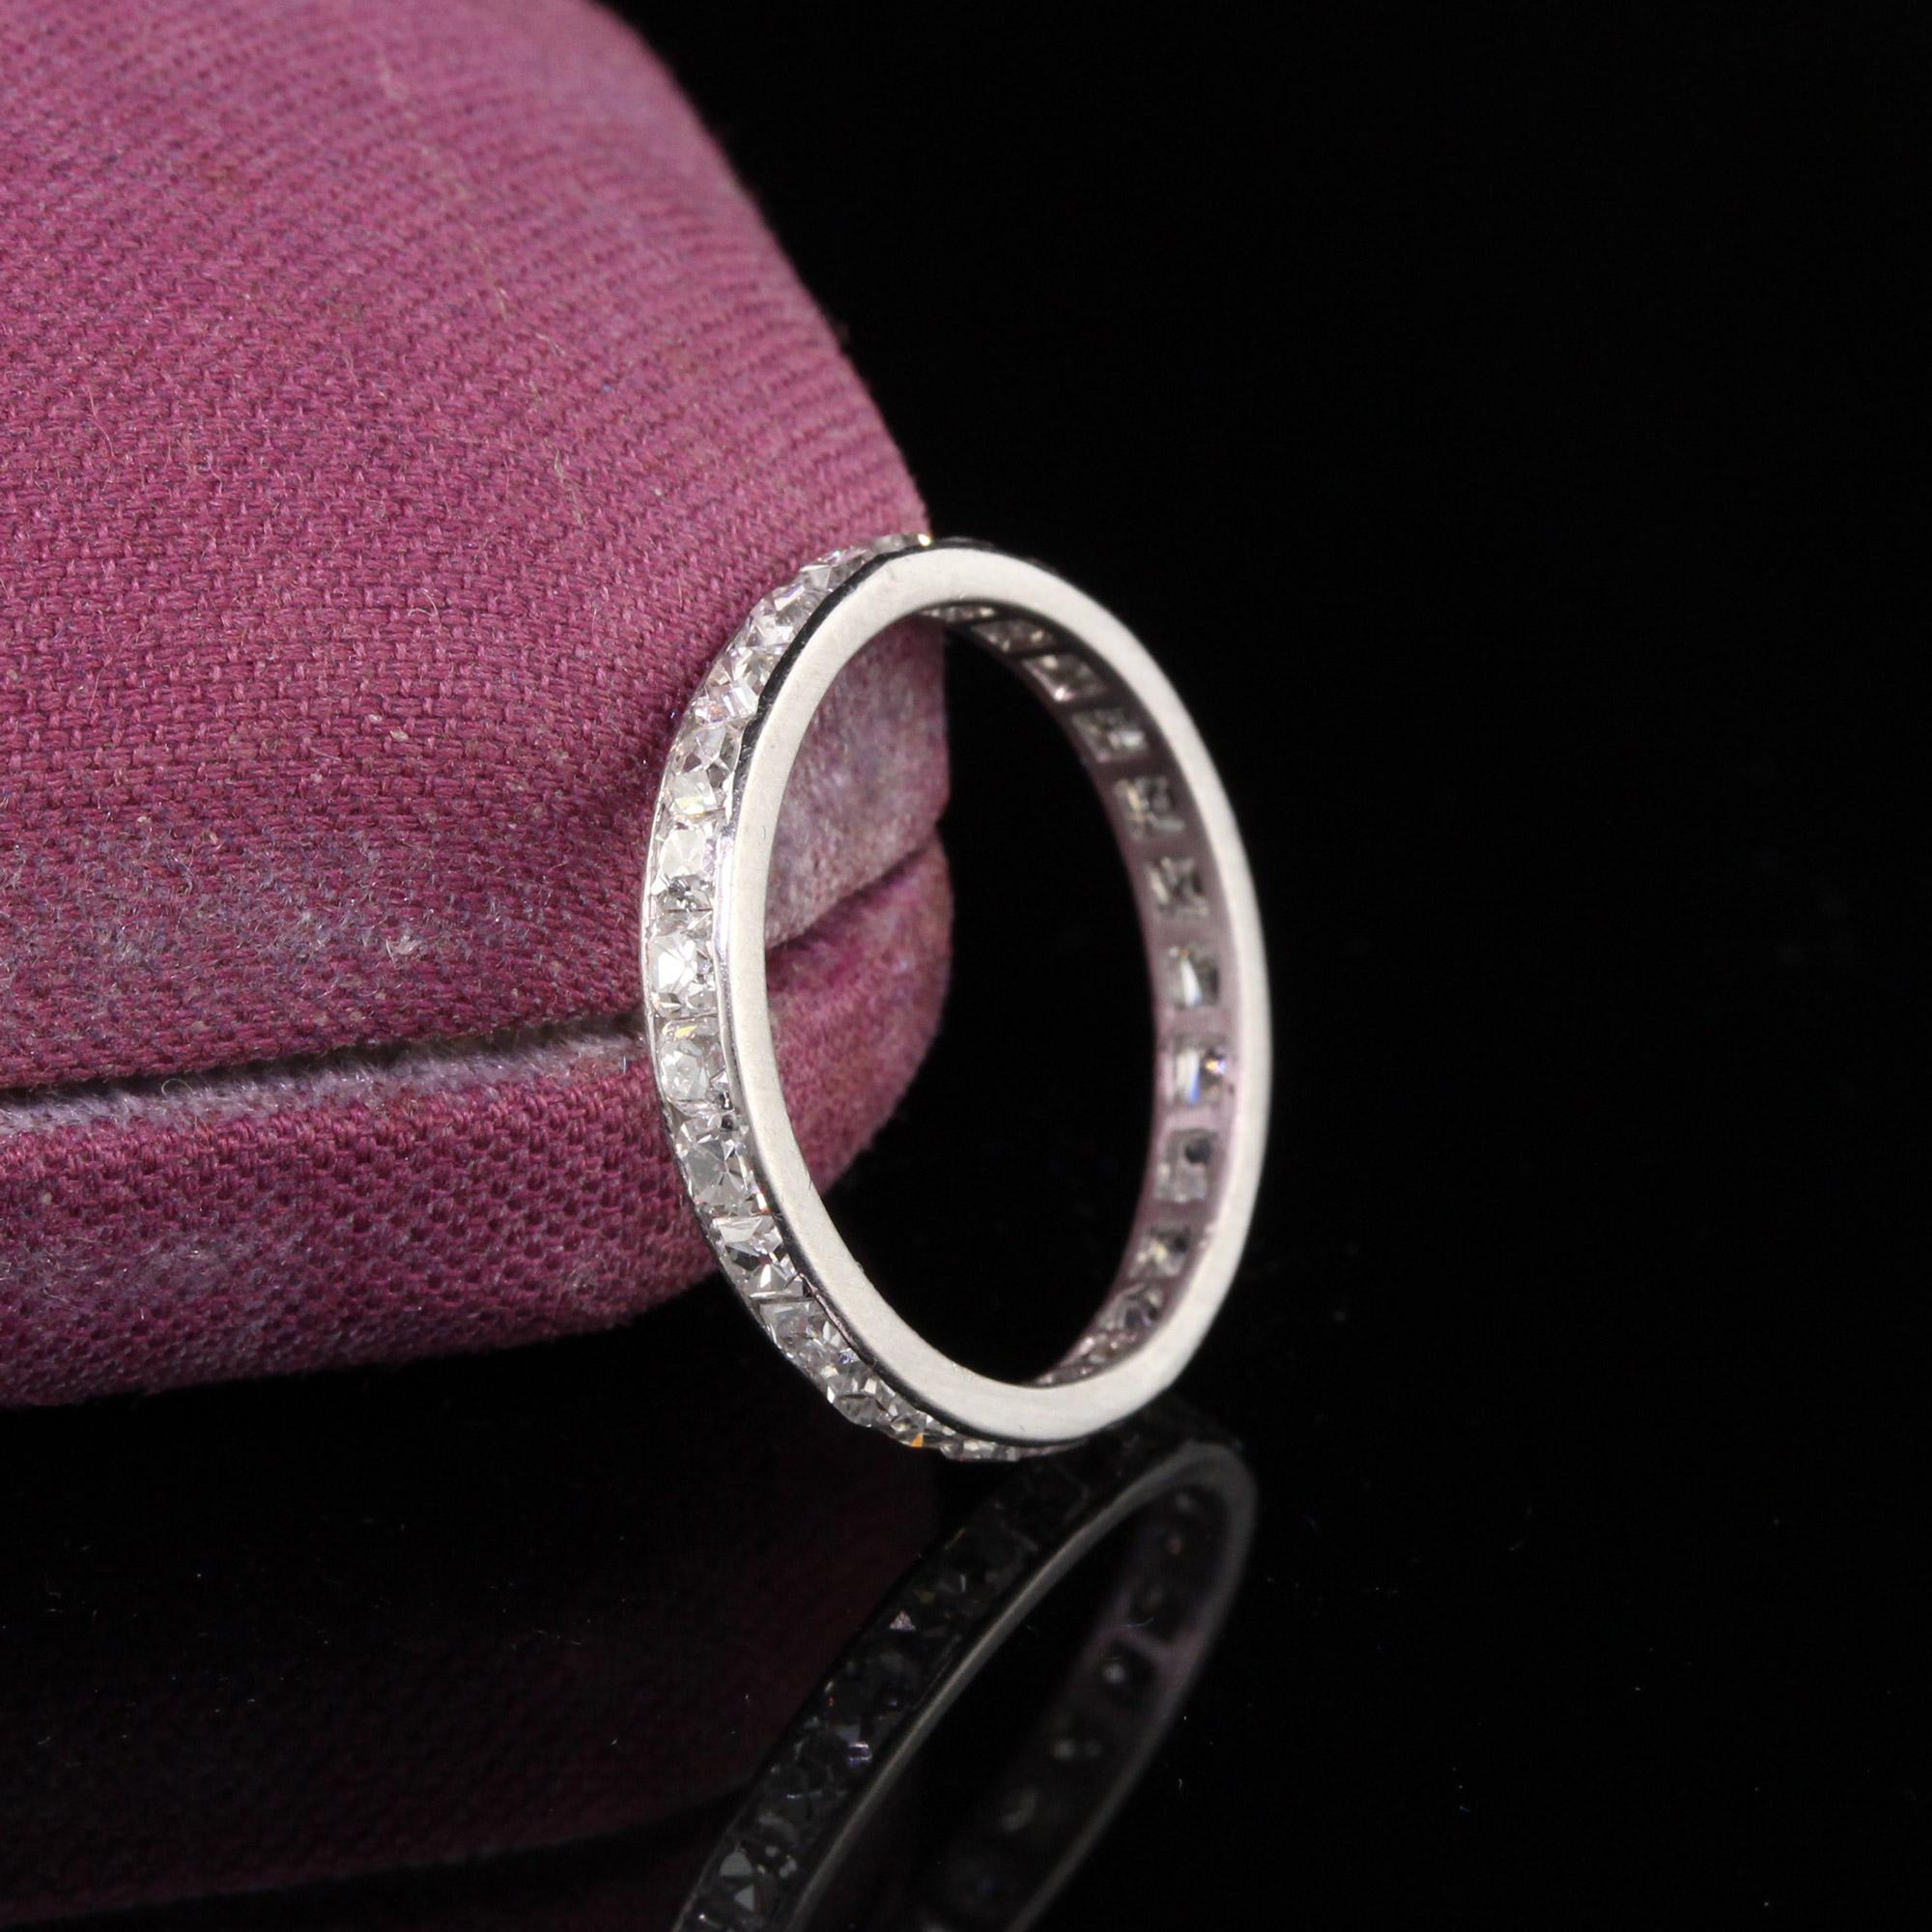 Gorgeous Art Deco platinum French cut diamond eternity band.

Item #R0483

Metal: Platinum

Weight: 1.6 Grams

Total Diamond Weight: Approximately 1.70 cts

Diamond Color: H

Diamond Clarity: VS2

Ring Size: 5.5

*Unfortunately this ring cannot be